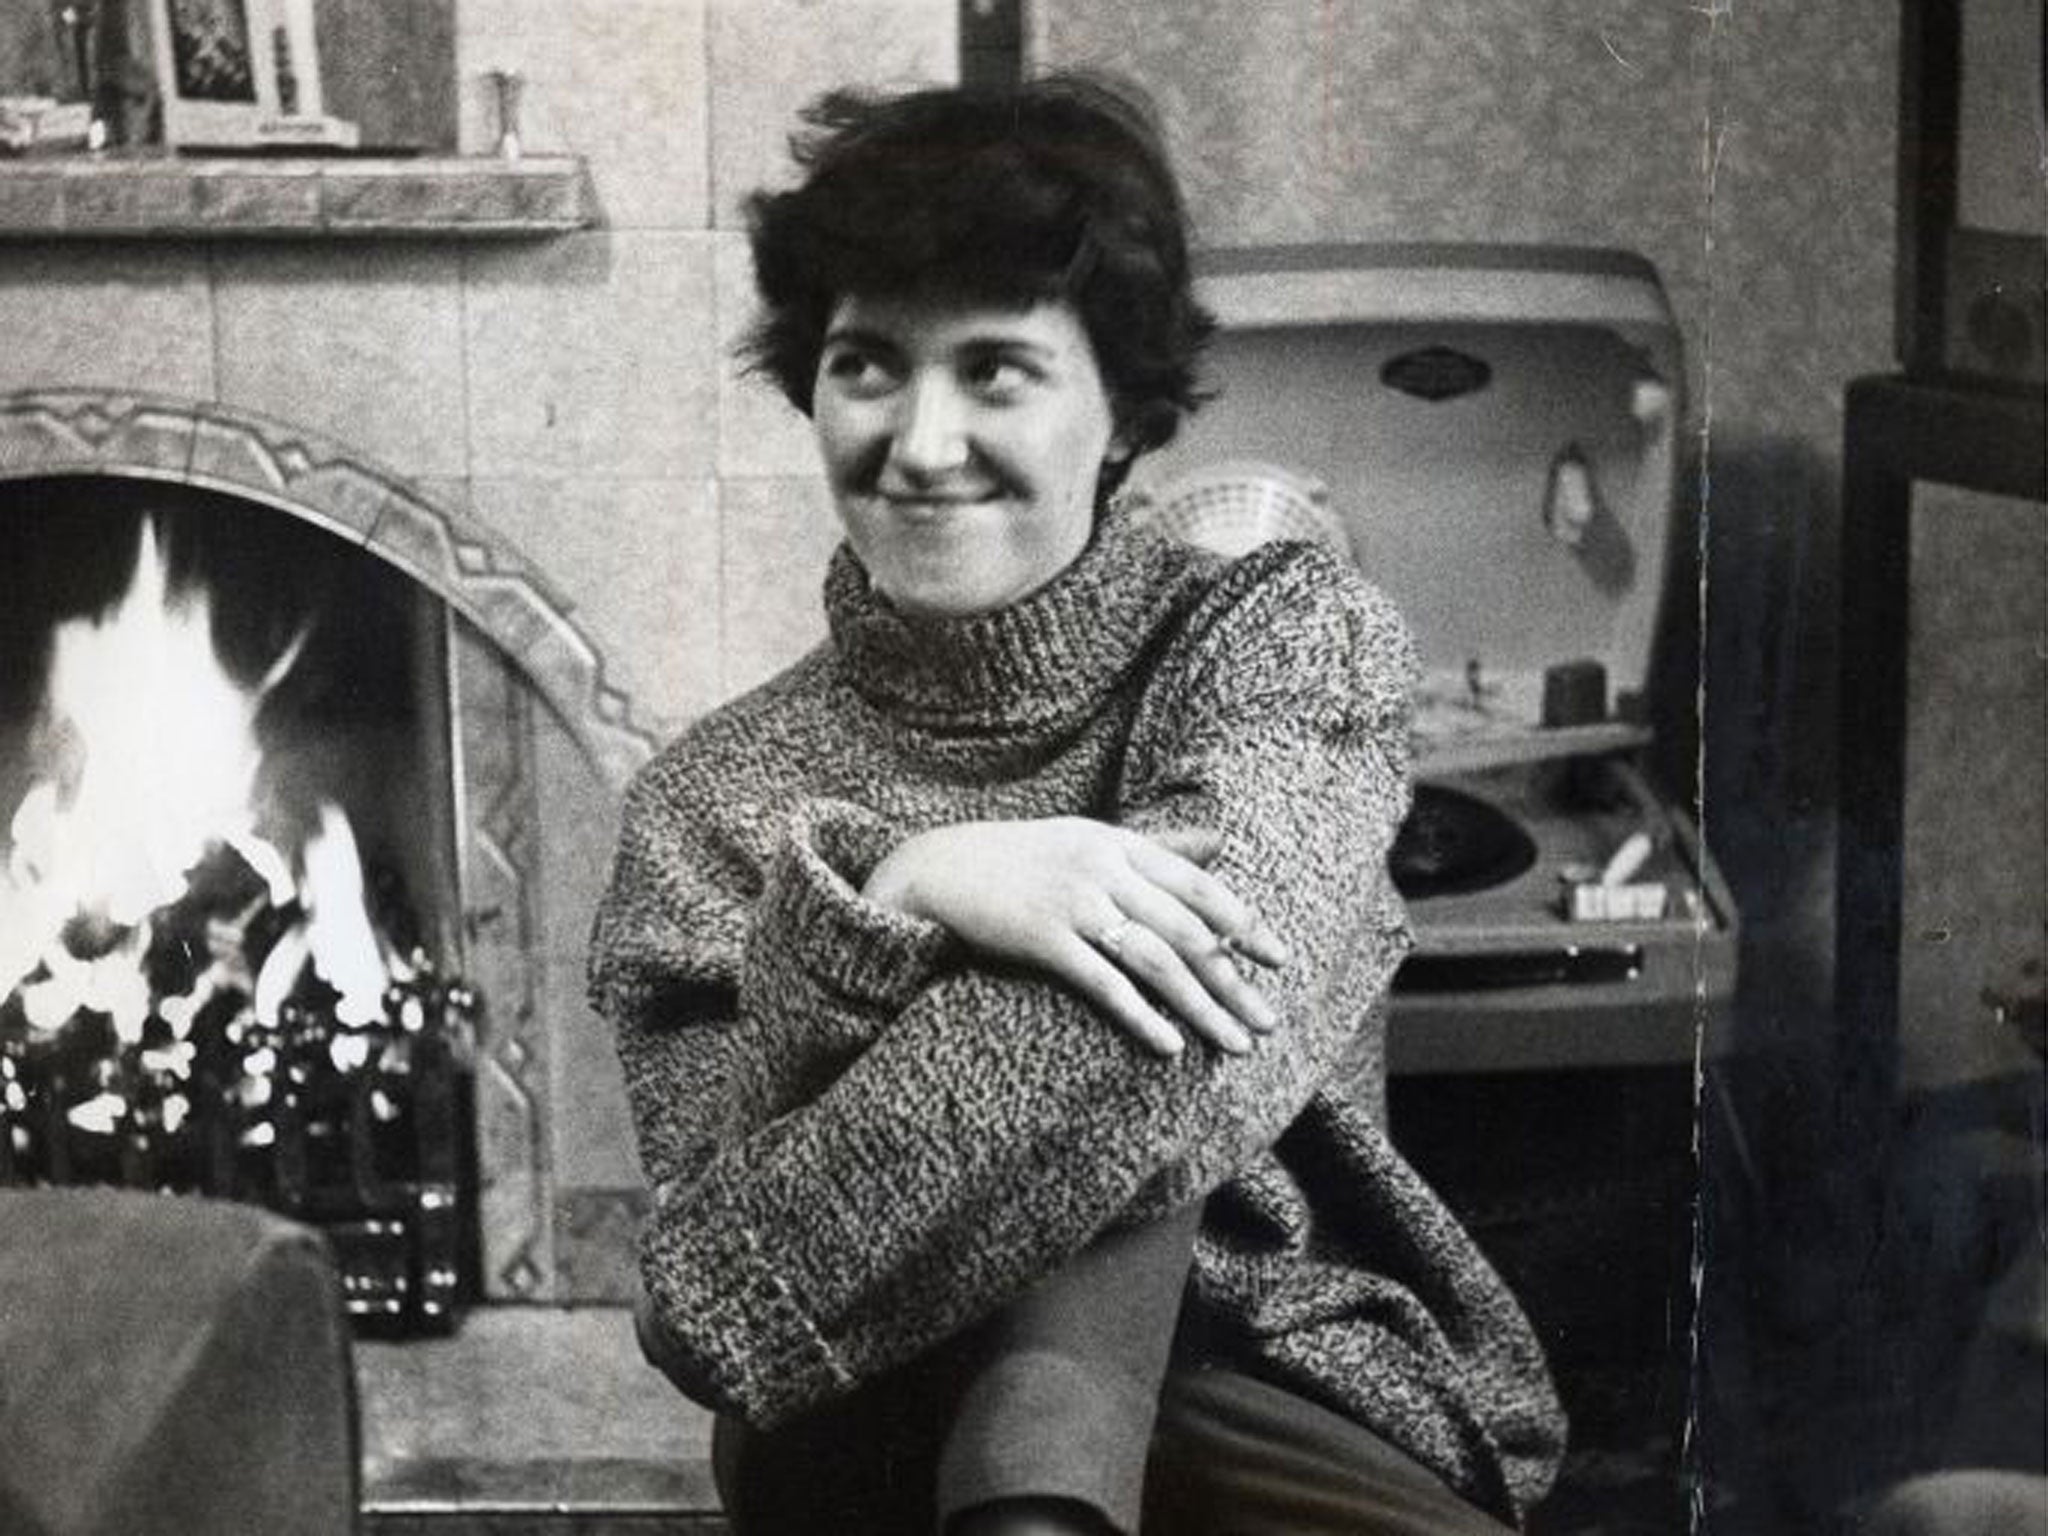 A question of taste: Shelagh Delaney’s ‘A Taste of Honey’ was performed at time when there were many women writers receiving critical acclaim